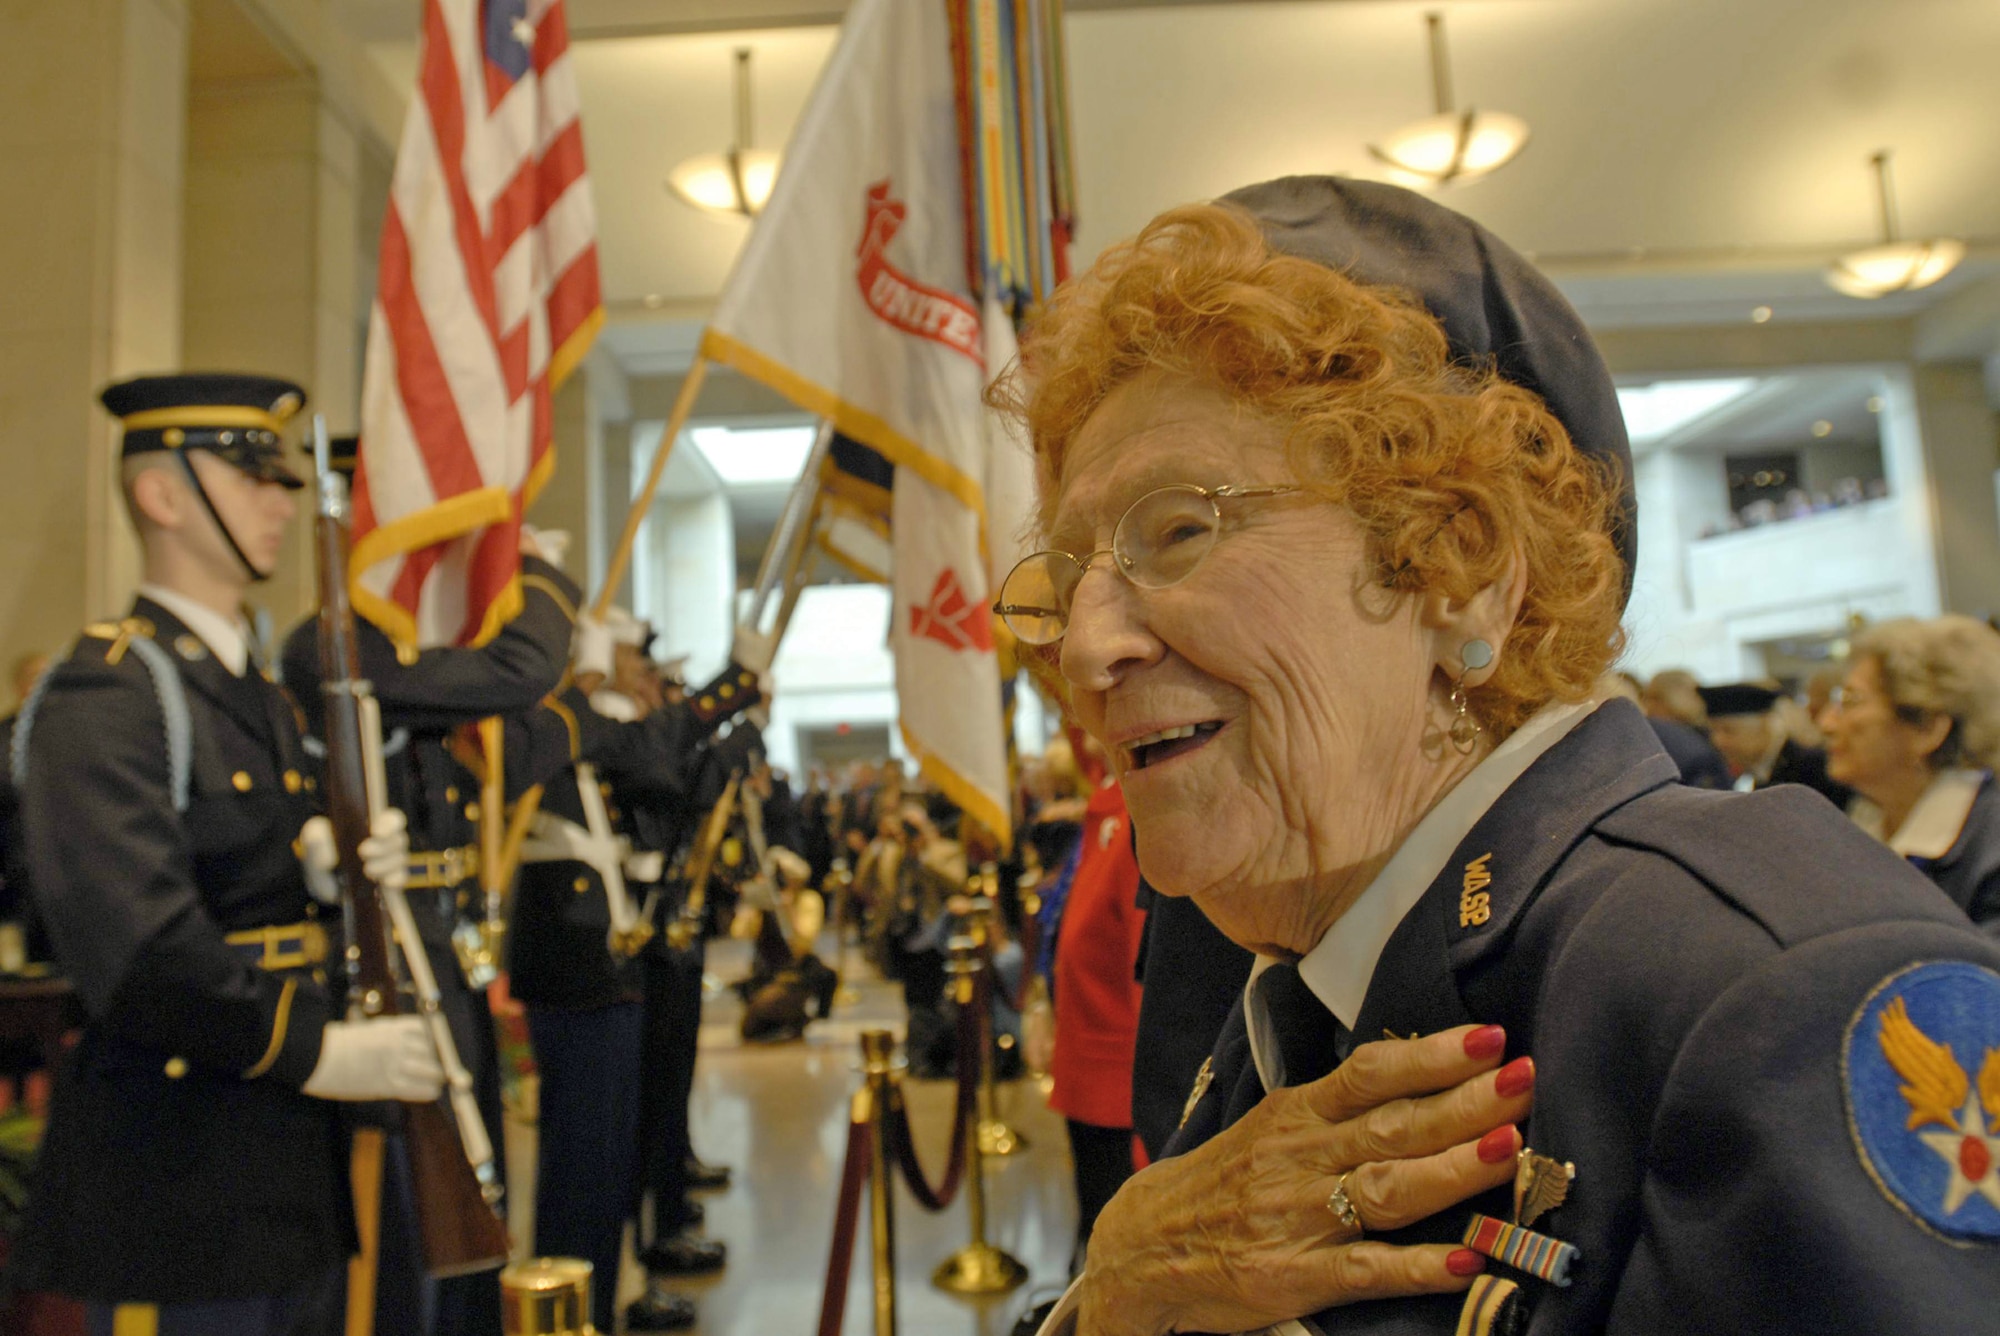 Betty Wall Strohfus, a Women Airforce Service Pilot from Minnesota, sings the "Star-Spangled Banner" during the Congressional Gold Medal ceremony at the Capitol March 10, 2010. More than 200 WASPs attended the event, many of them wearing their World War II-era uniforms. (U.S. Air Force photo/Staff Sgt. J.G. Buzanowski)